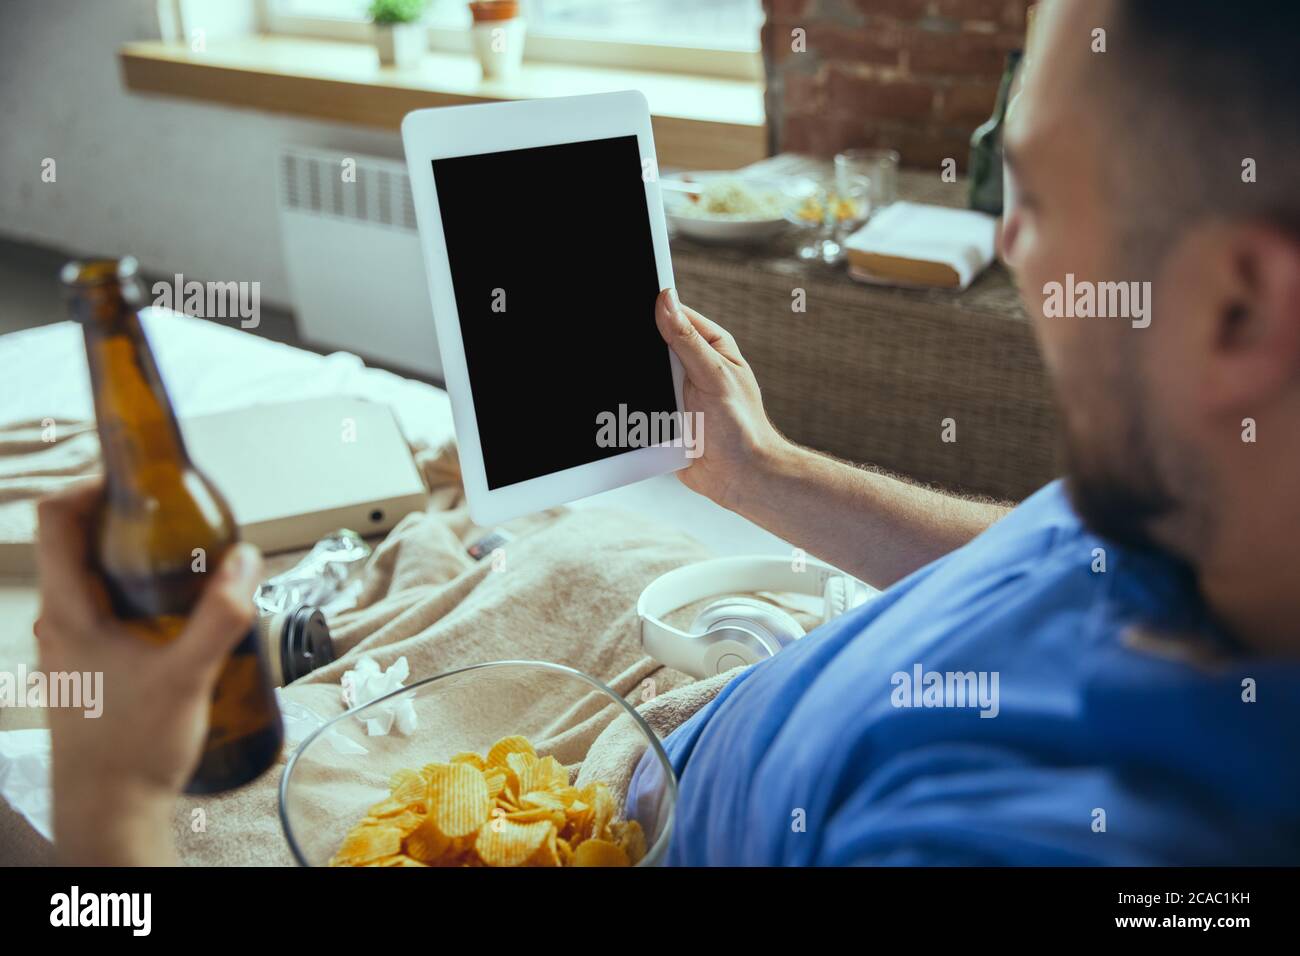 Sport fan, drinks beer. Lazy man living in his bed surrounded with messy. No need to go out to be happy. Using gadgets, watching movie and series, looks emotional. Tablet with copyspace for ad. Stock Photo